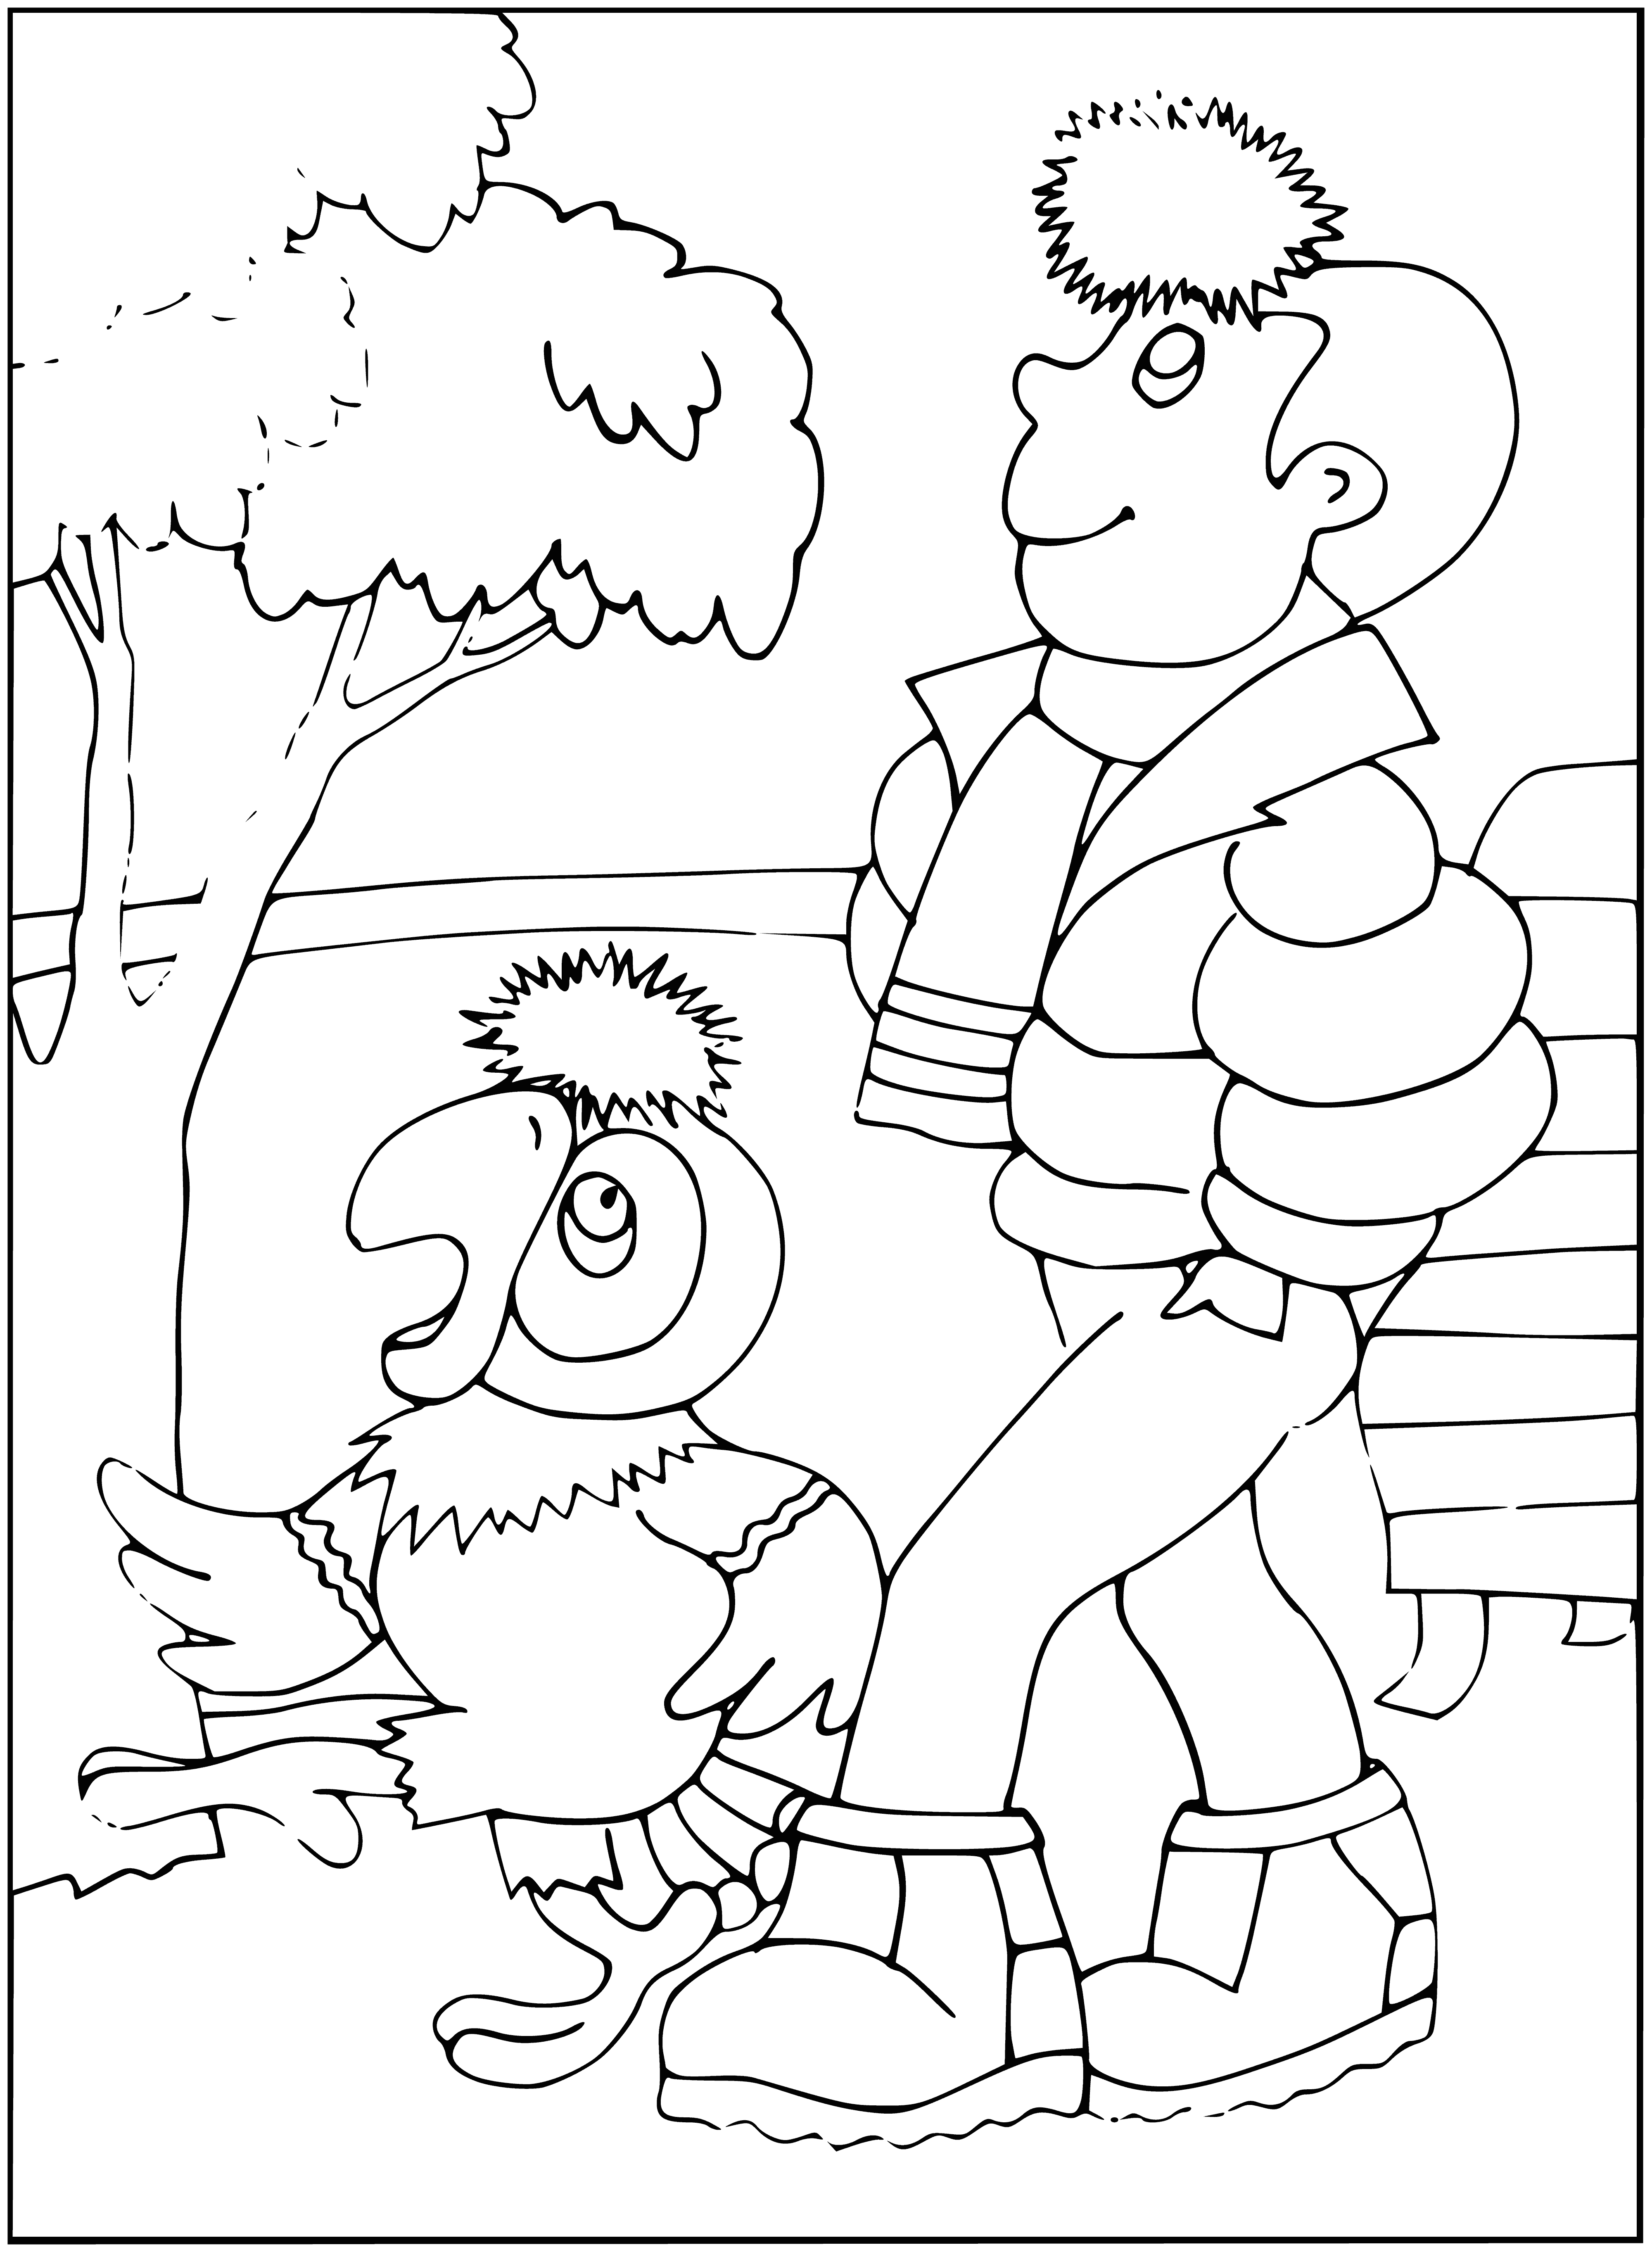 coloring page: A prodigal parrot is reunited with a new owner after soaring above a tranquil body of blue & green water.